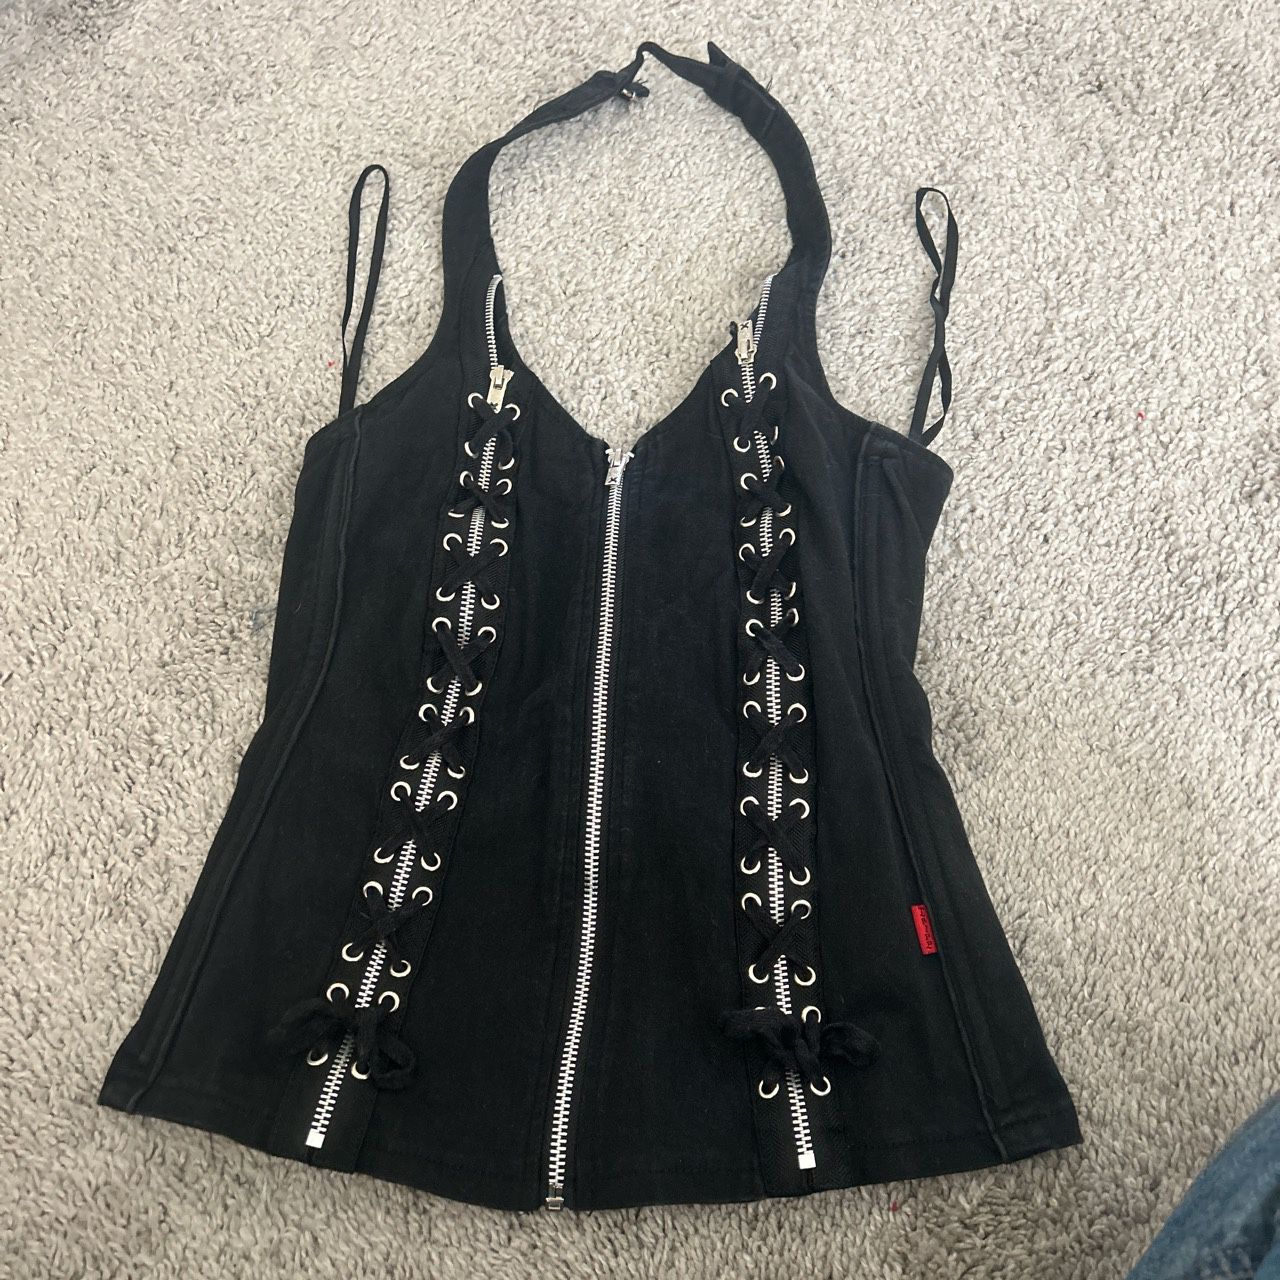 Tripp NYC halter top for Sale in Henderson, NV - OfferUp